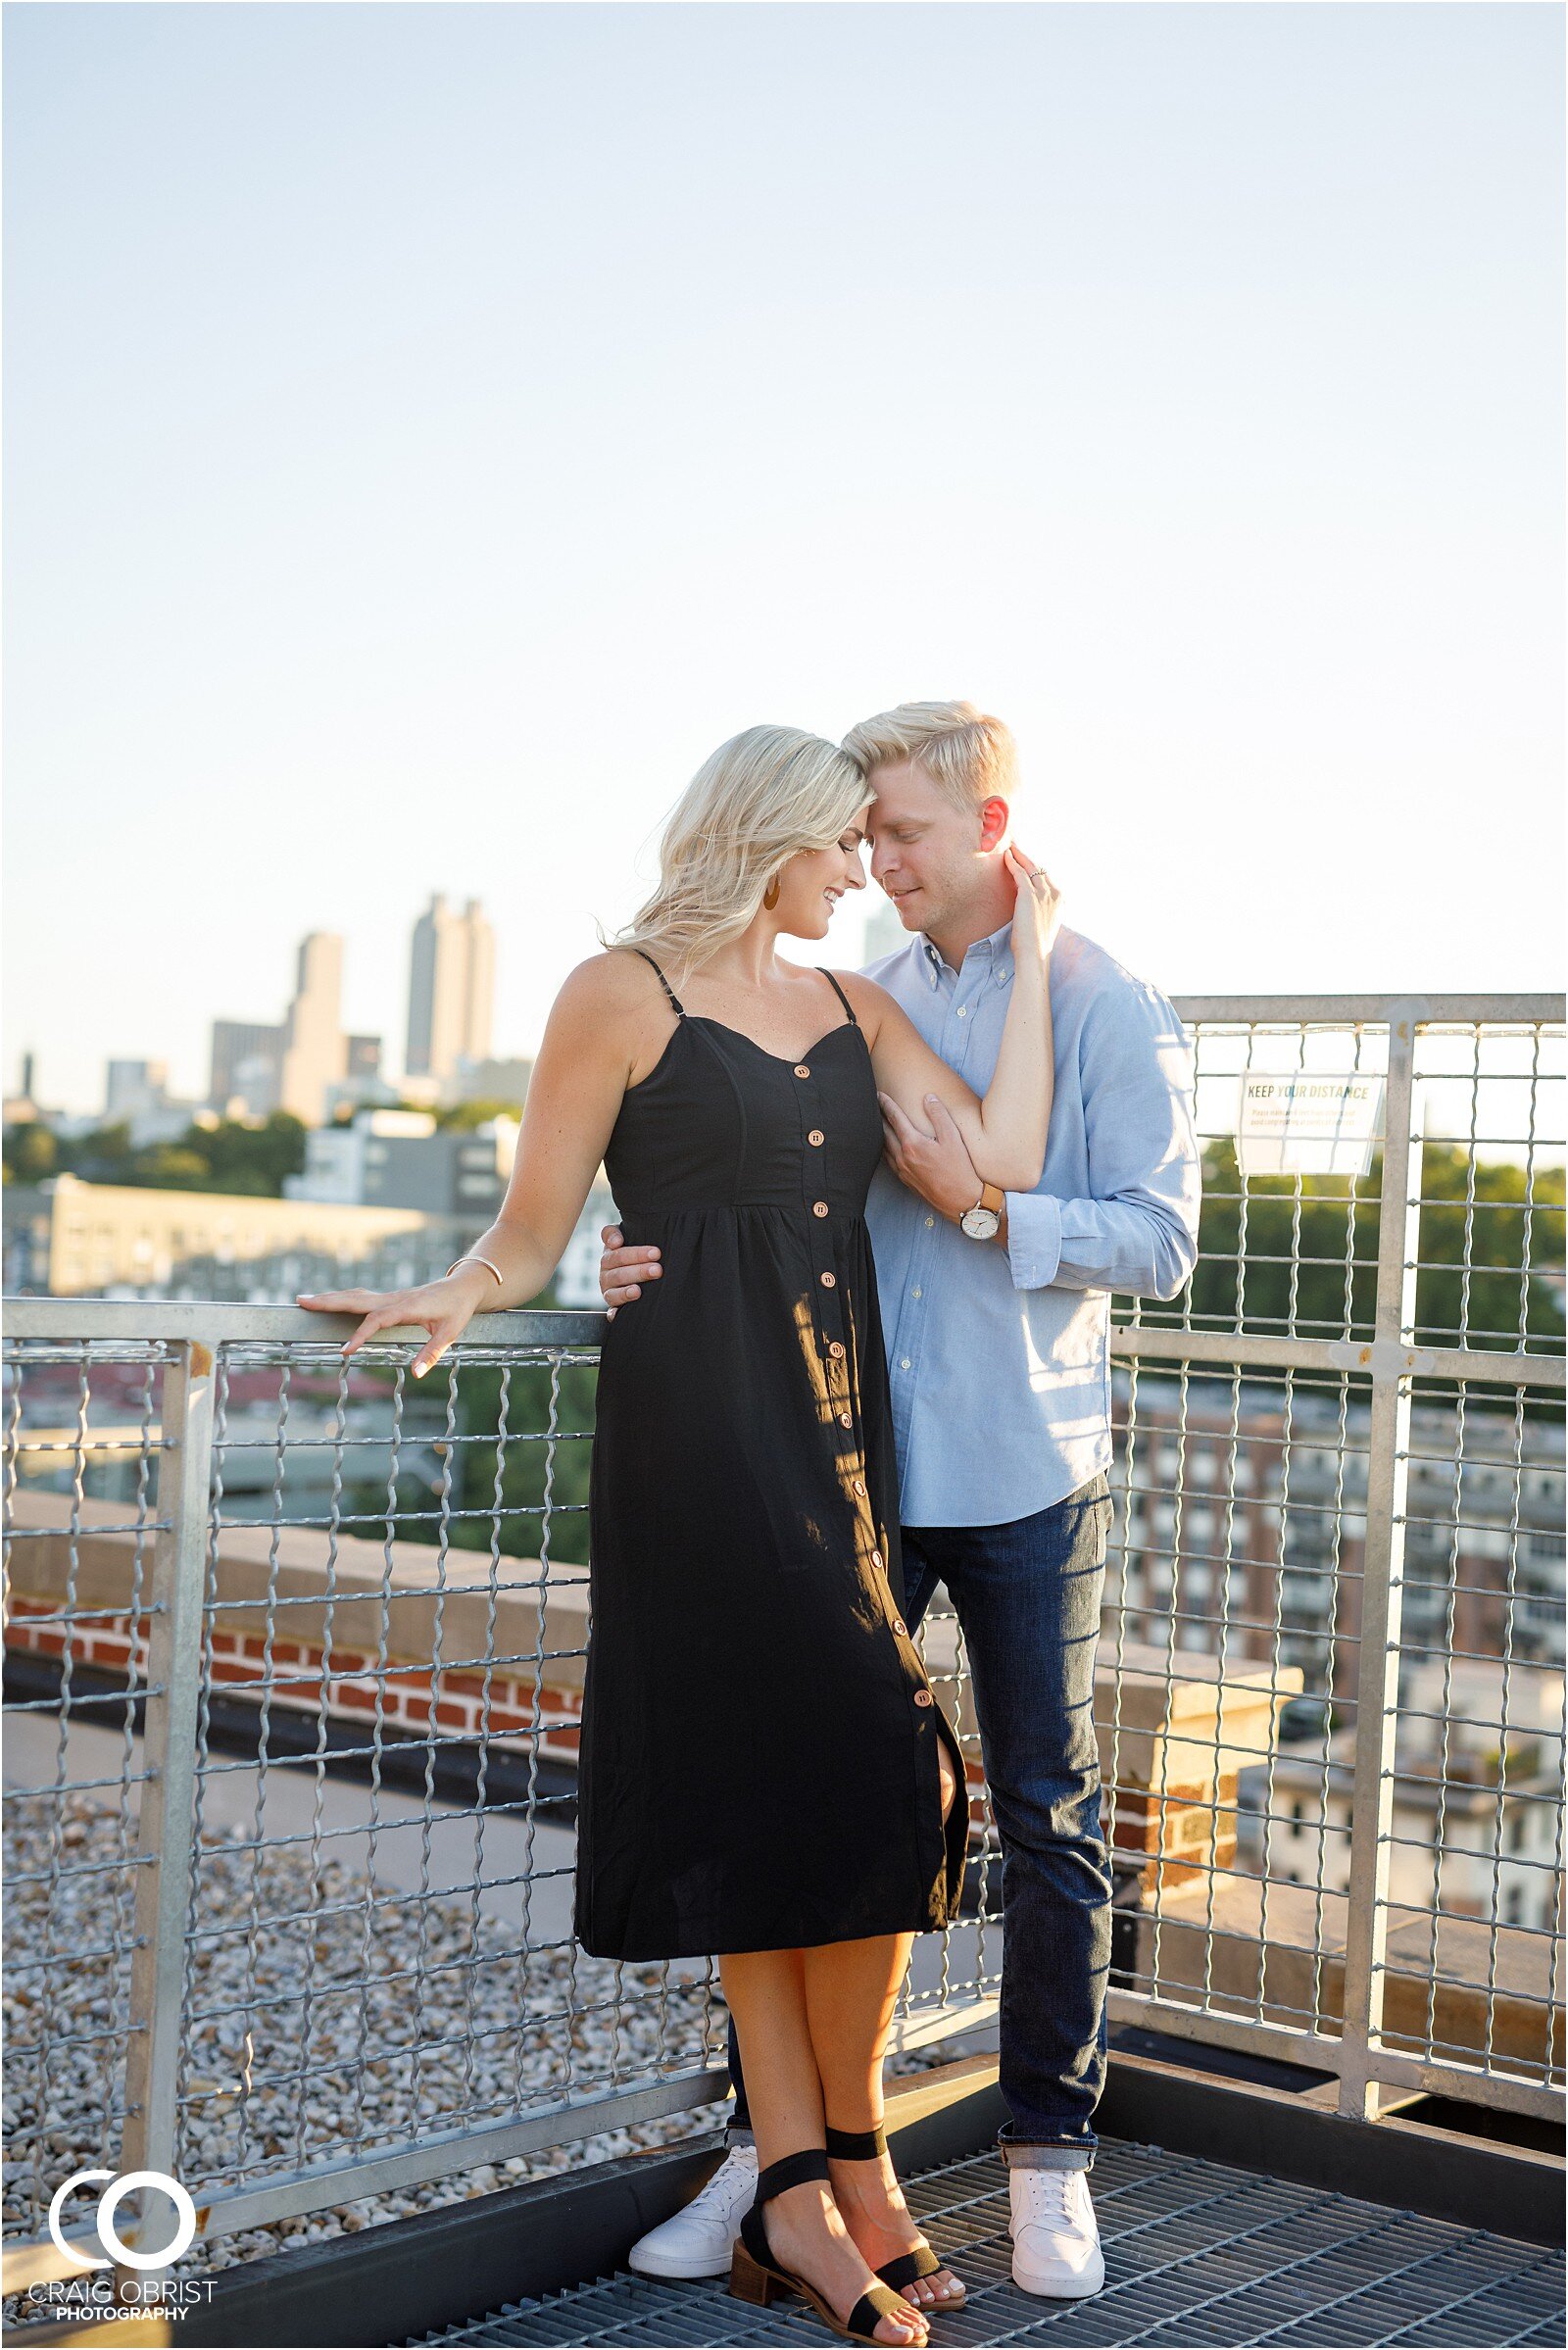 Cator Woolford Ponce city market rooftop sunset engagement portraits atlanta_0043.jpg